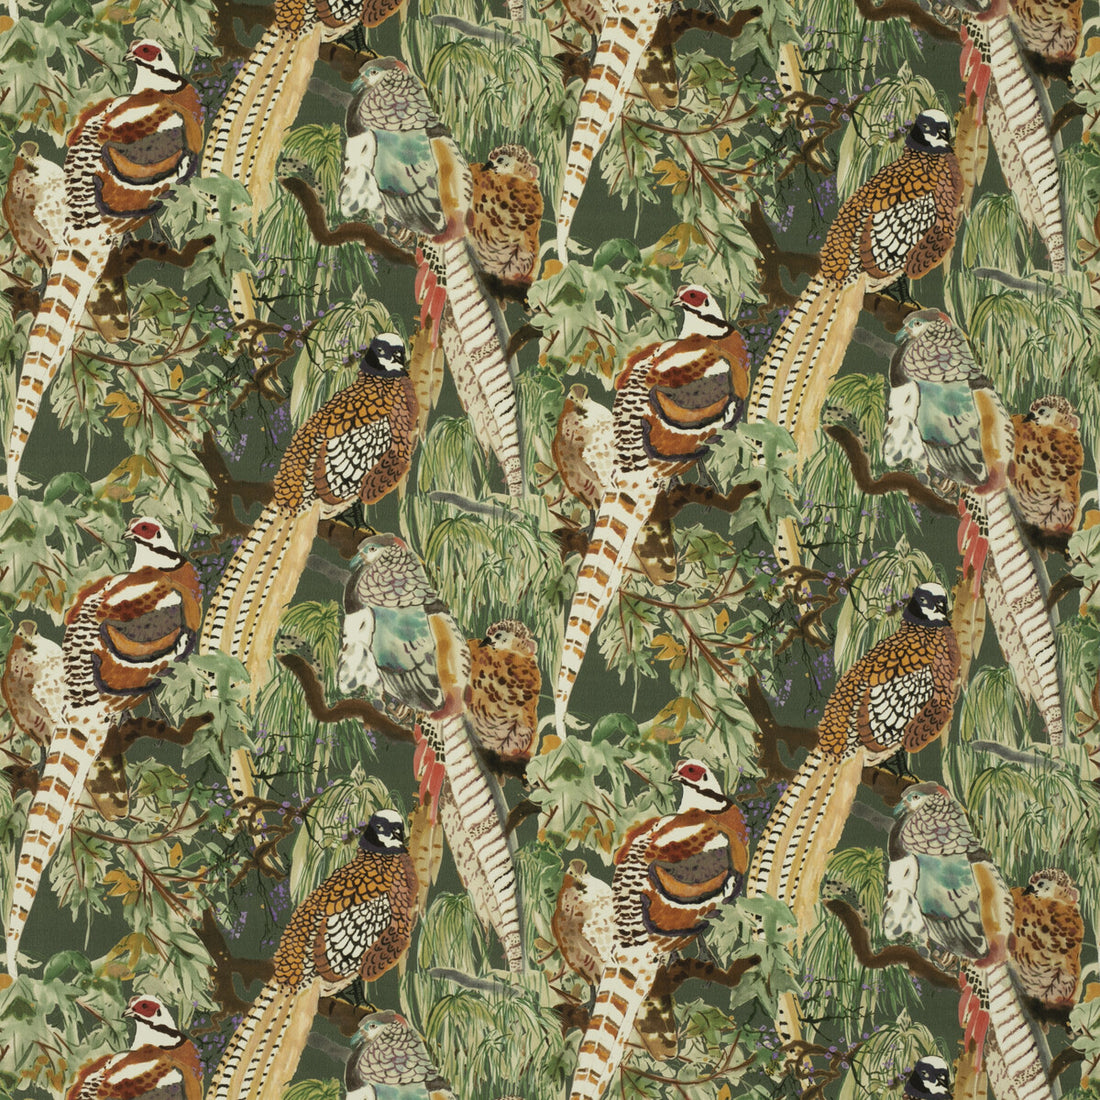 Game Birds Velvet fabric in forest color - pattern FD268.R102.0 - by Mulberry in the Icons Fabrics collection